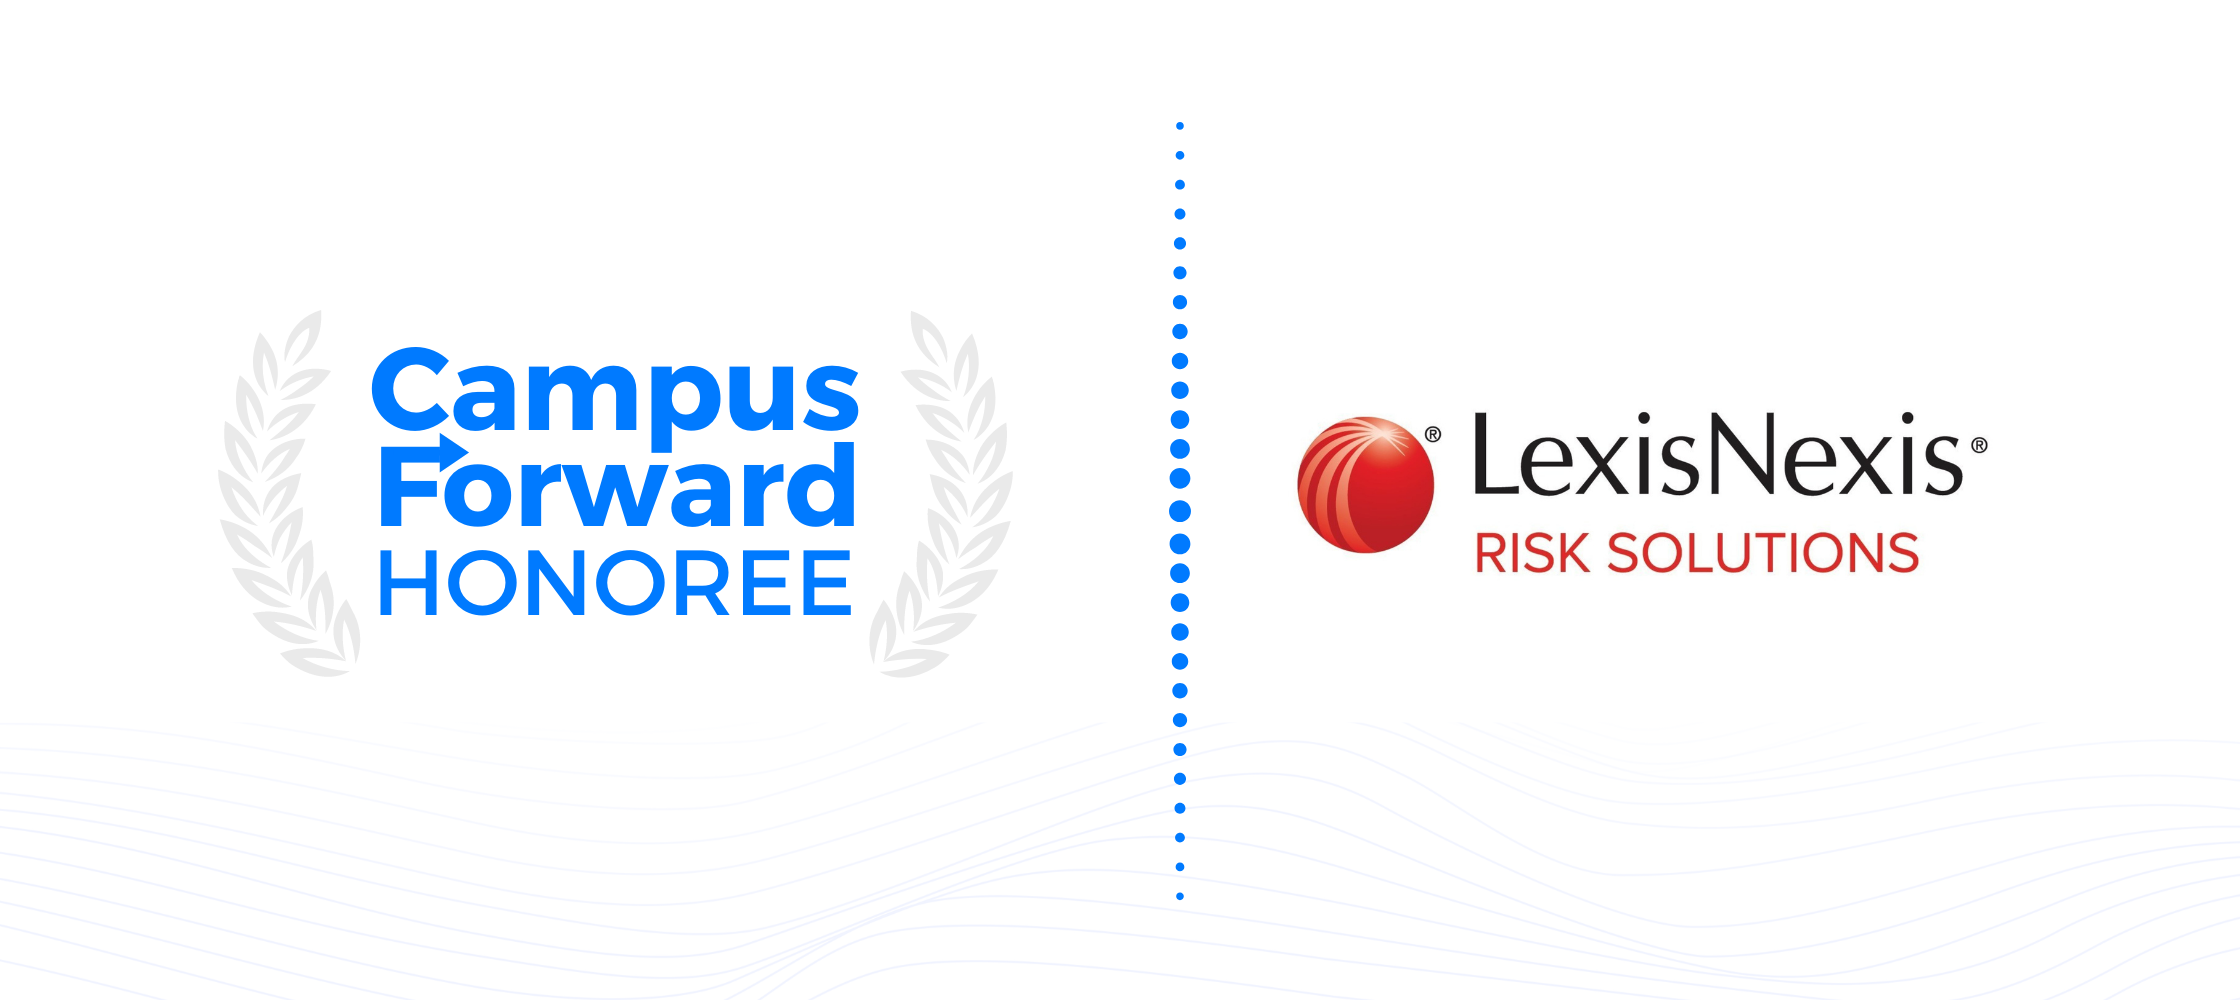 Campus Forward Honoree - LexisNexis Risk Solutions Group